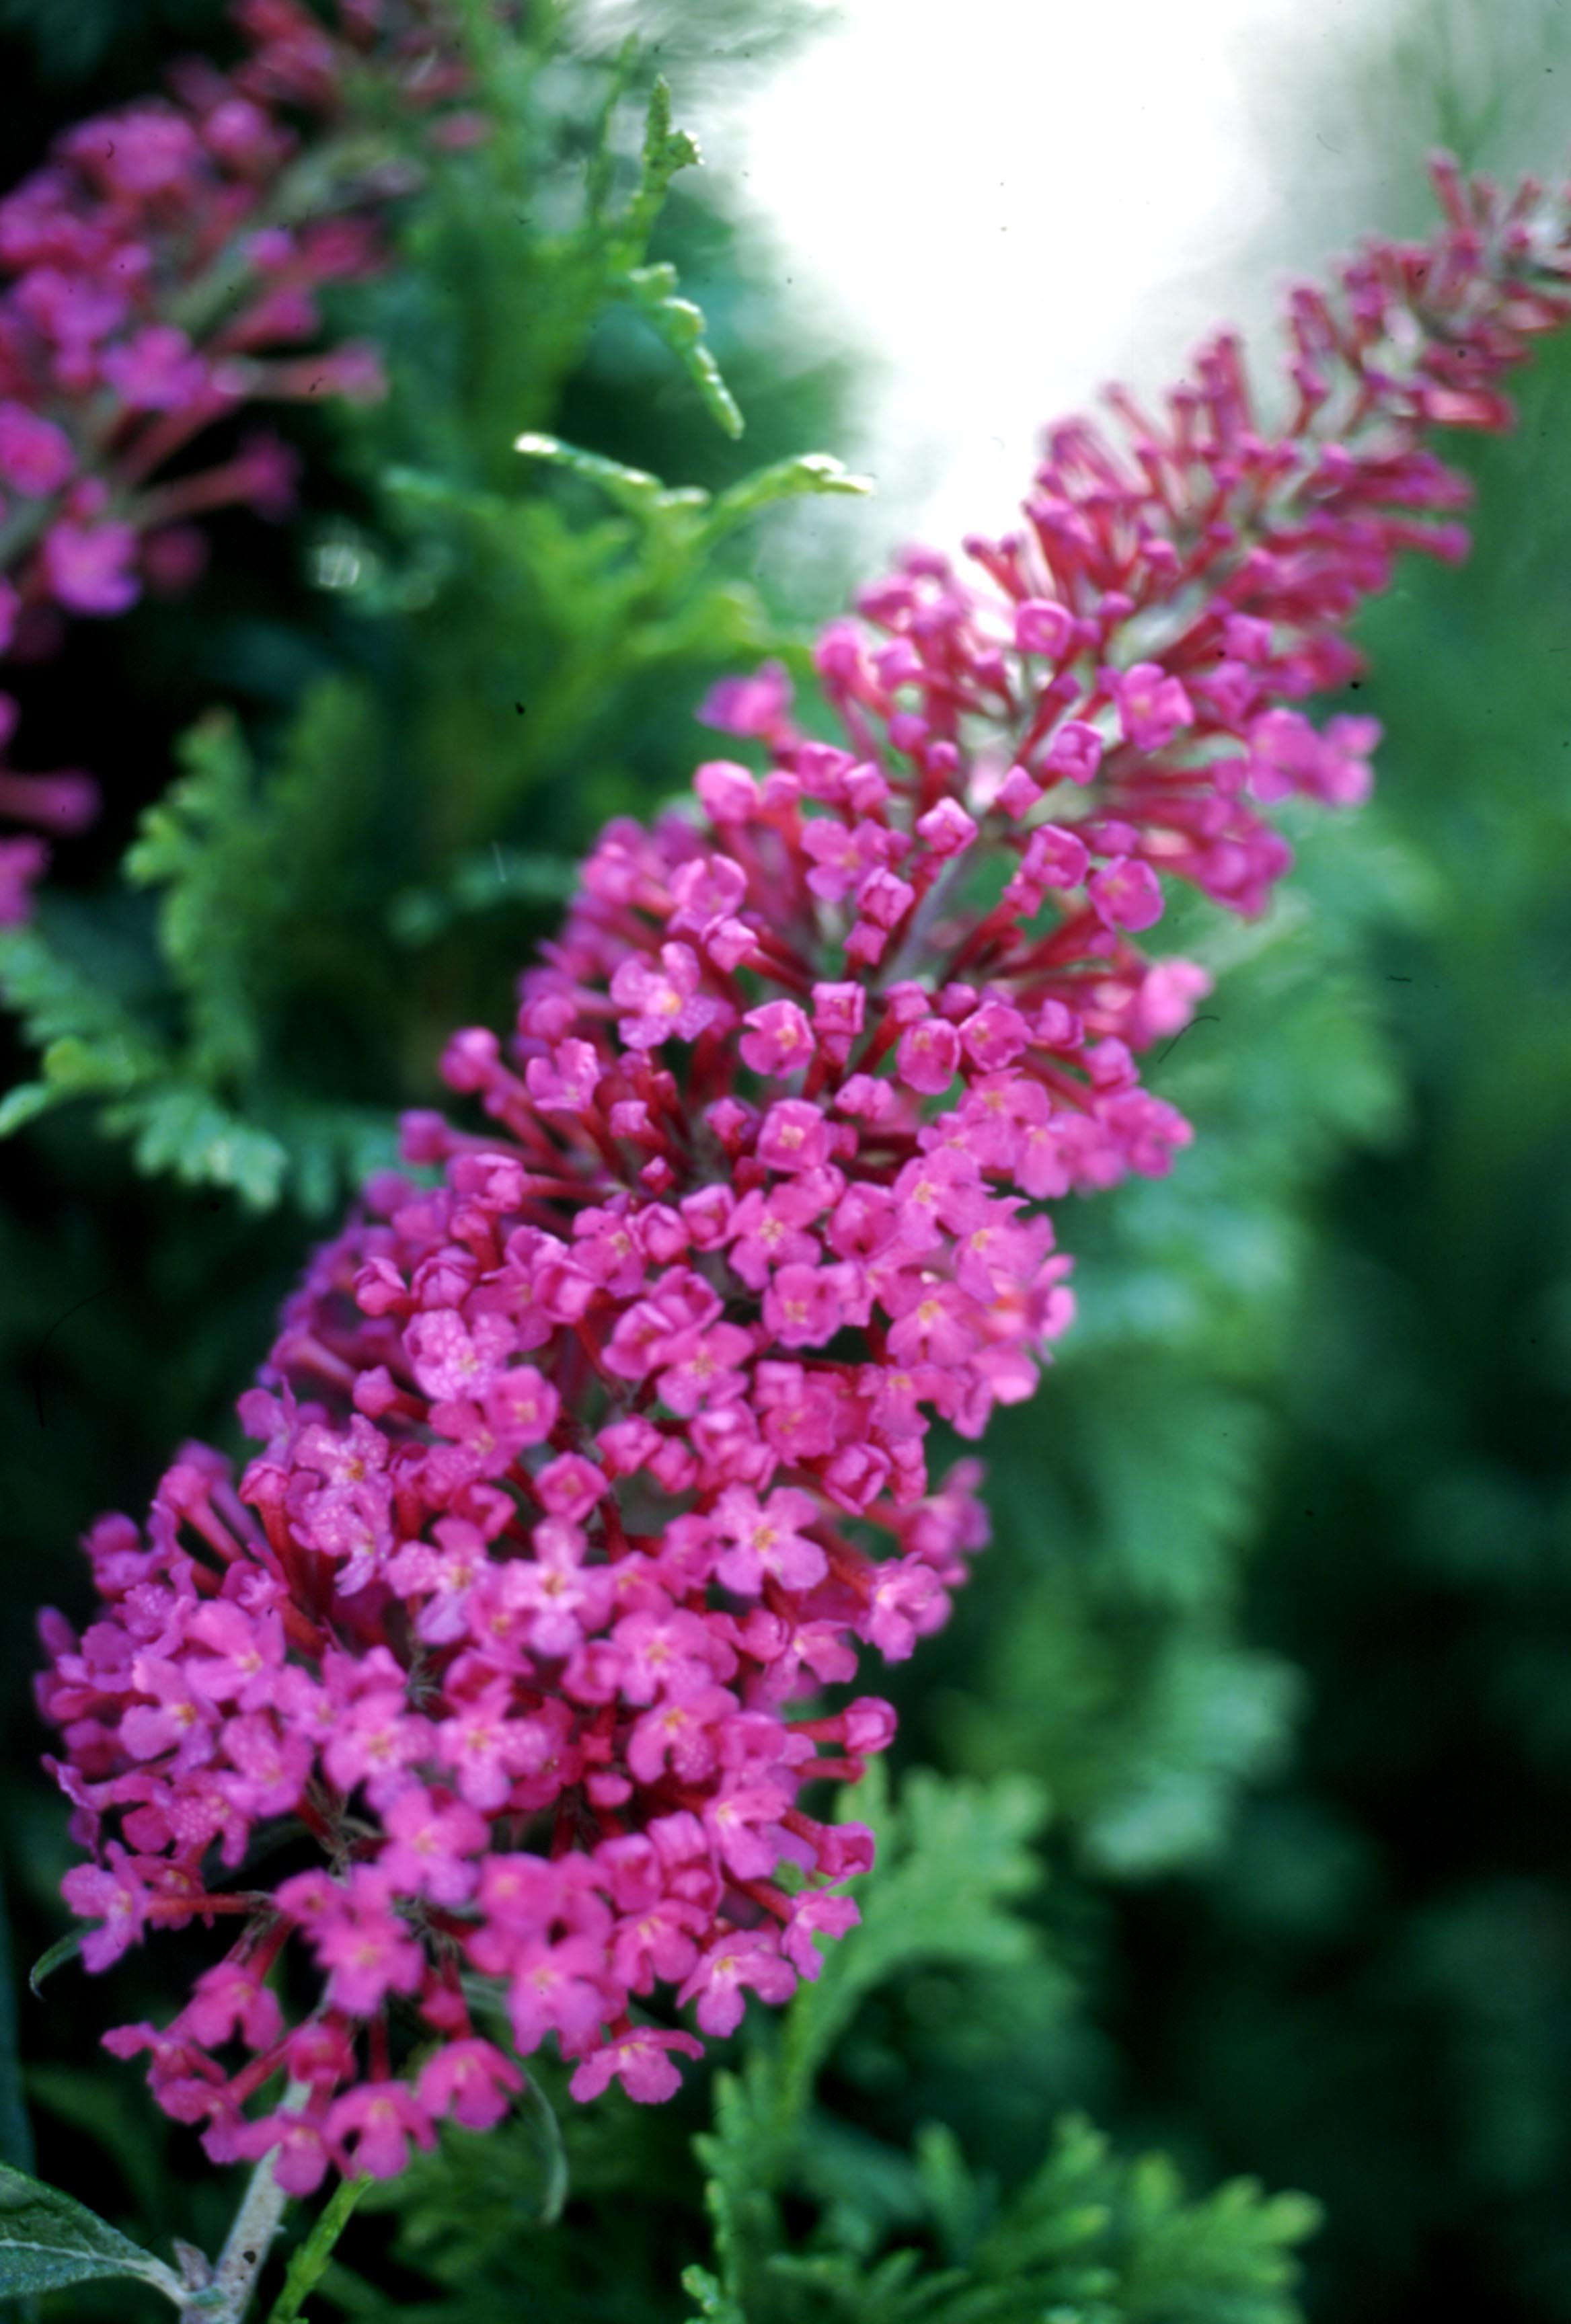 Attraction is a butterfly bush with bright pink flower spikes in summer